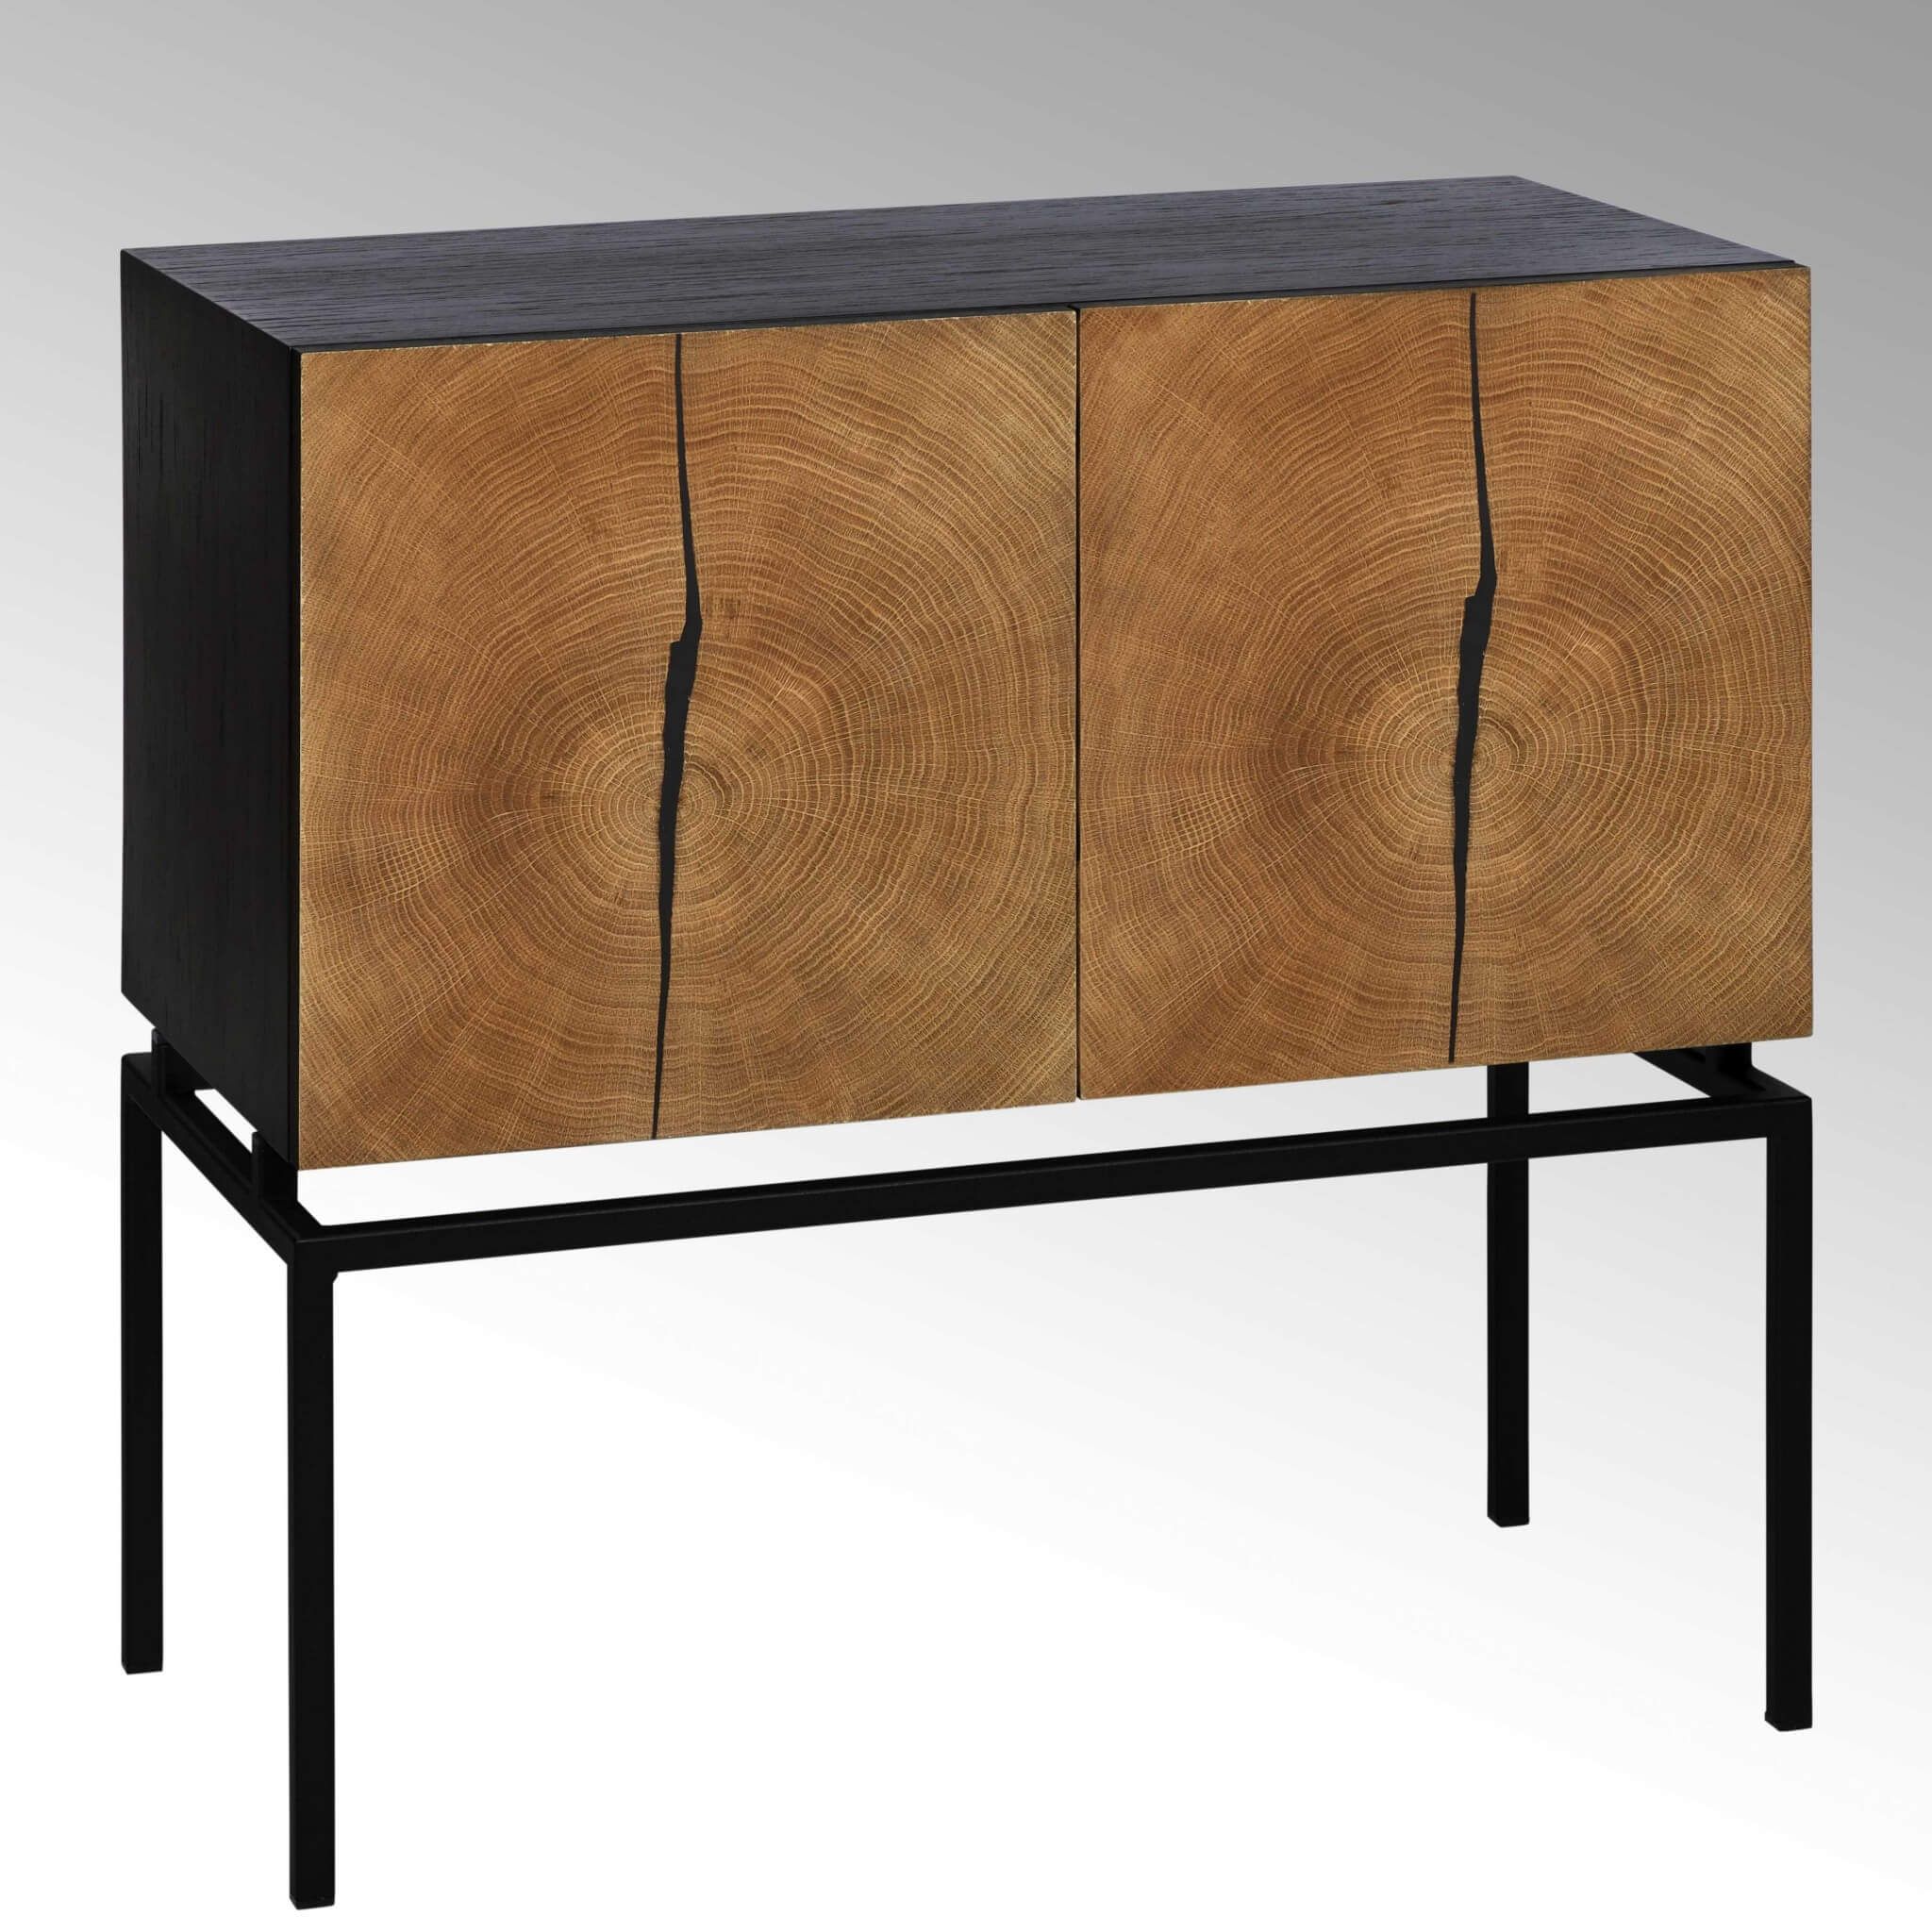 Lambert Kay Eiche Sideboard Schwarz Intended For Newest Dillen Sideboards (View 3 of 20)